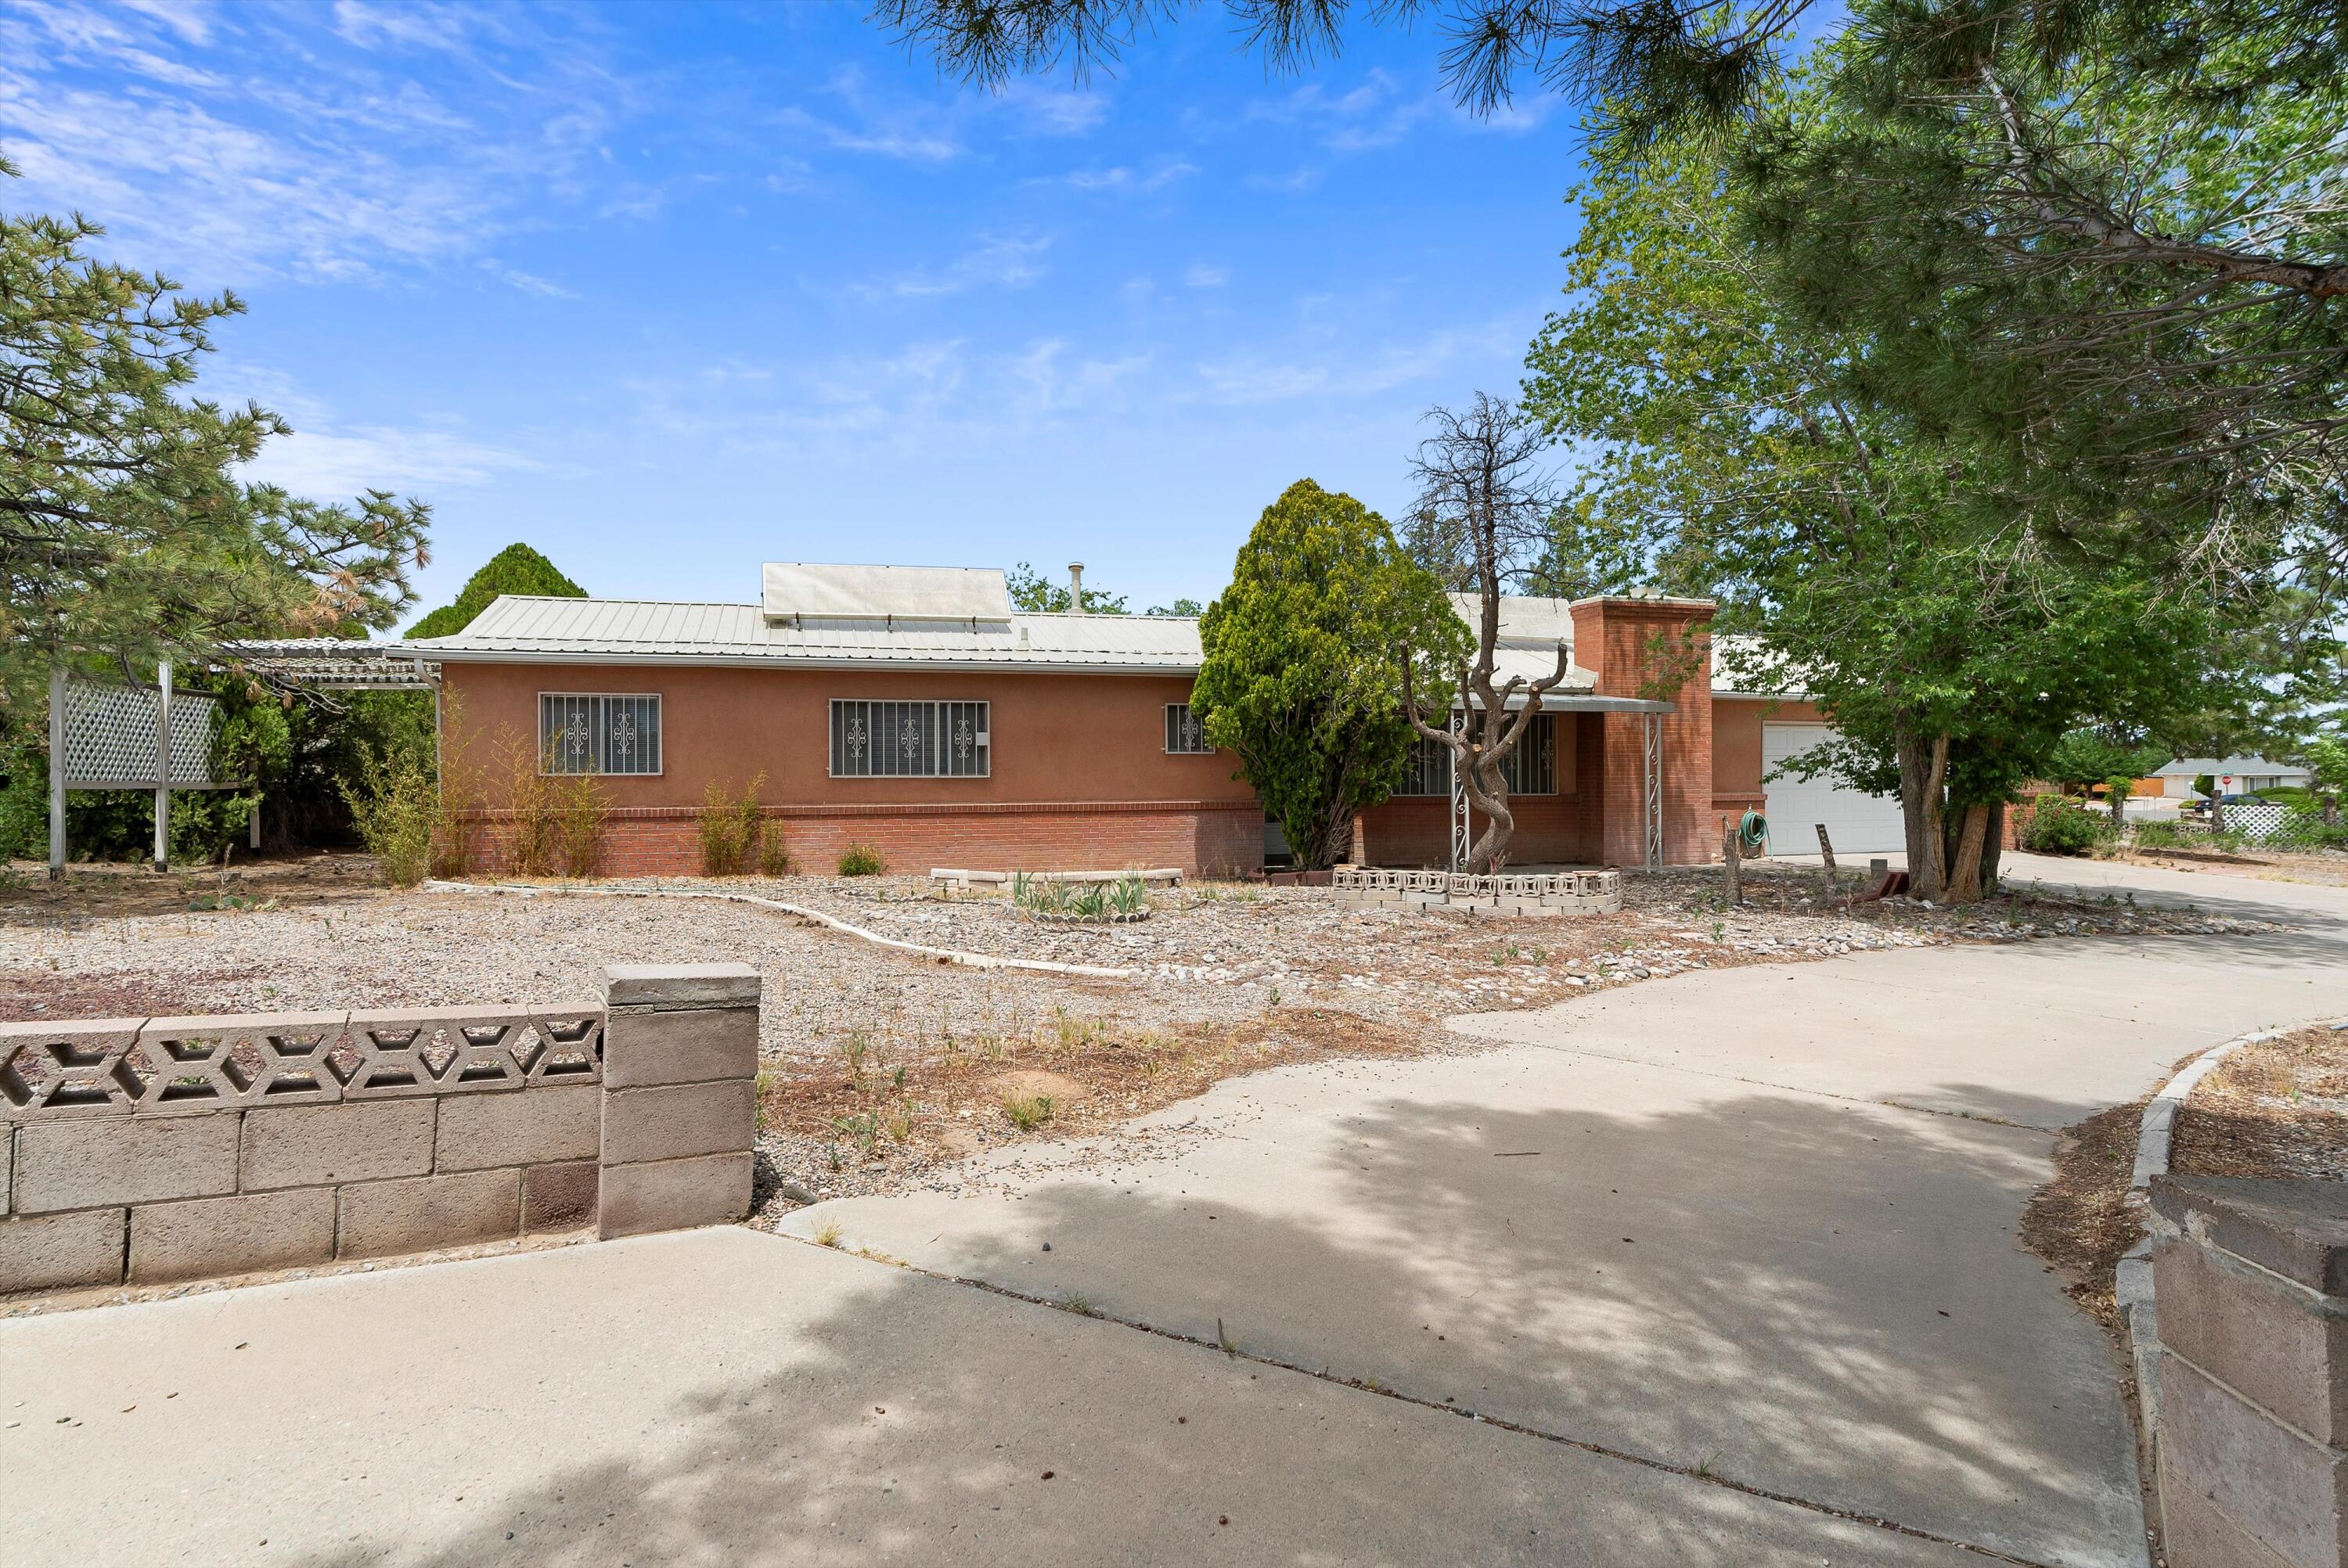 Well built home in the heart of Corrales Heights.  Featuring refrigerated air, granite counter tops, and a metal roof!  Situated on a large corner lot, with 3 additional storage sheds, and back yard access possible. No HOA! This home will not last long!